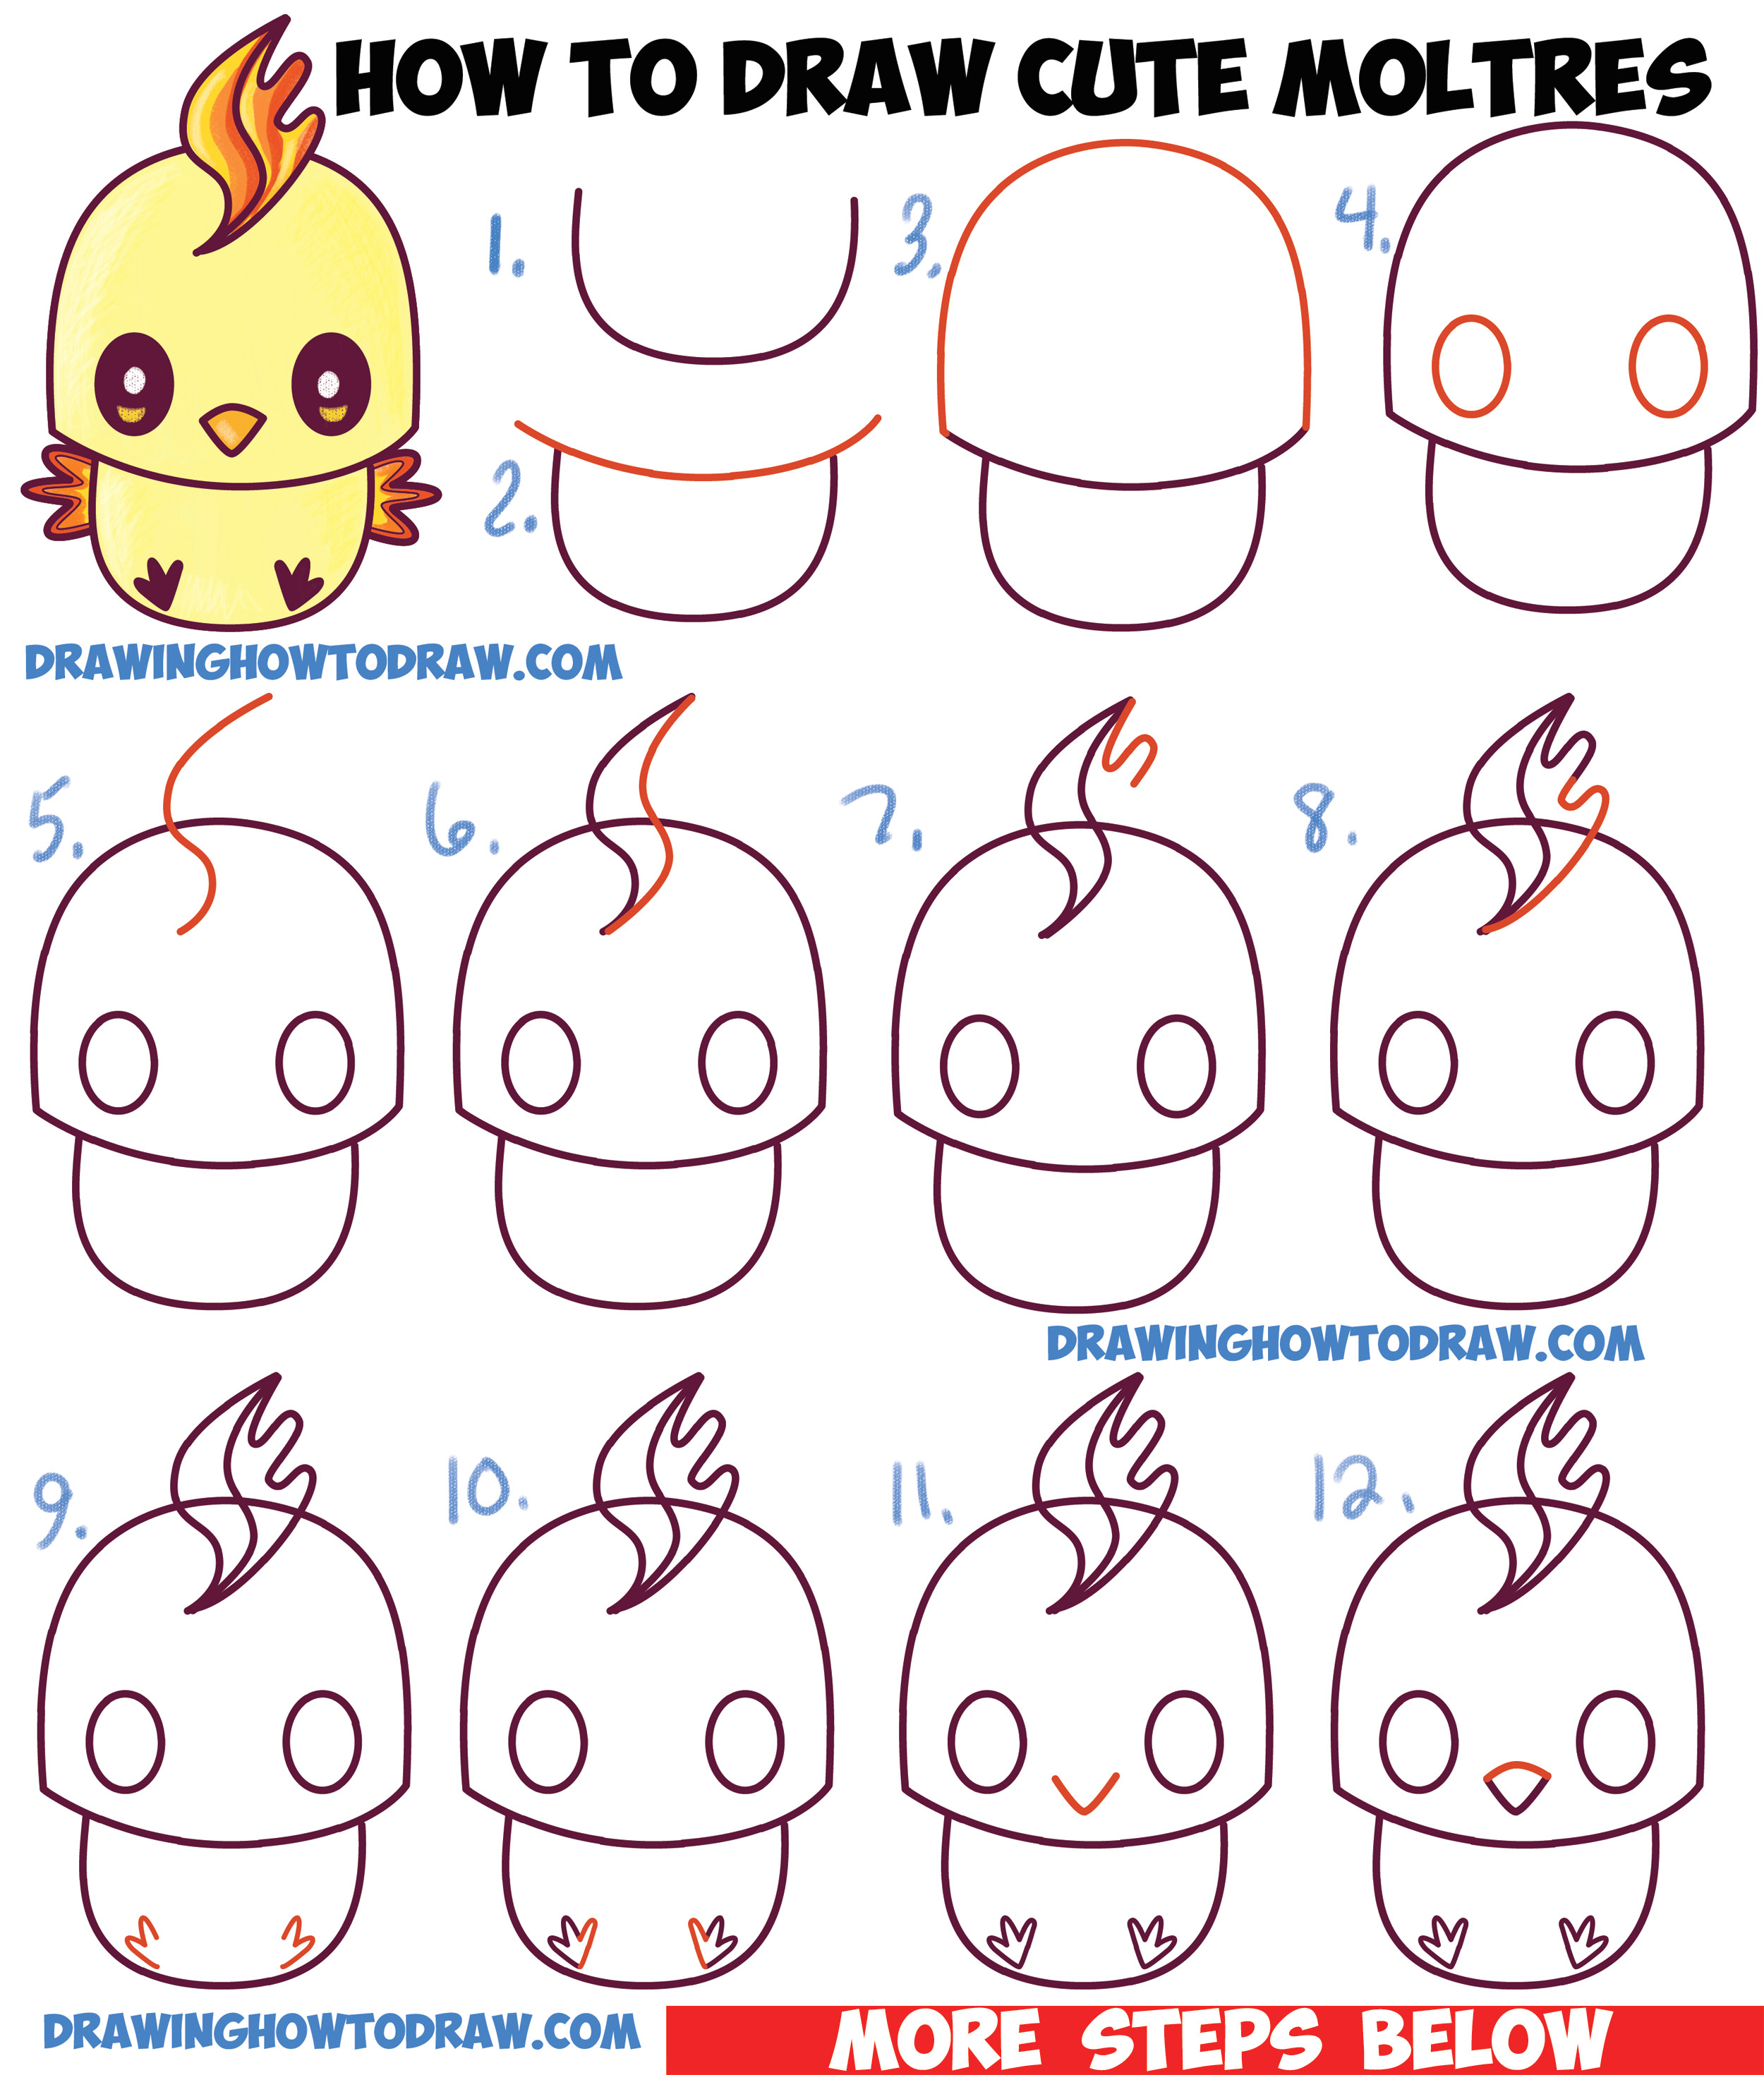 Easy 5 Step Drawings How to Draw Cute Kawaii Chibi Moltres From Pokemon In Easy Step